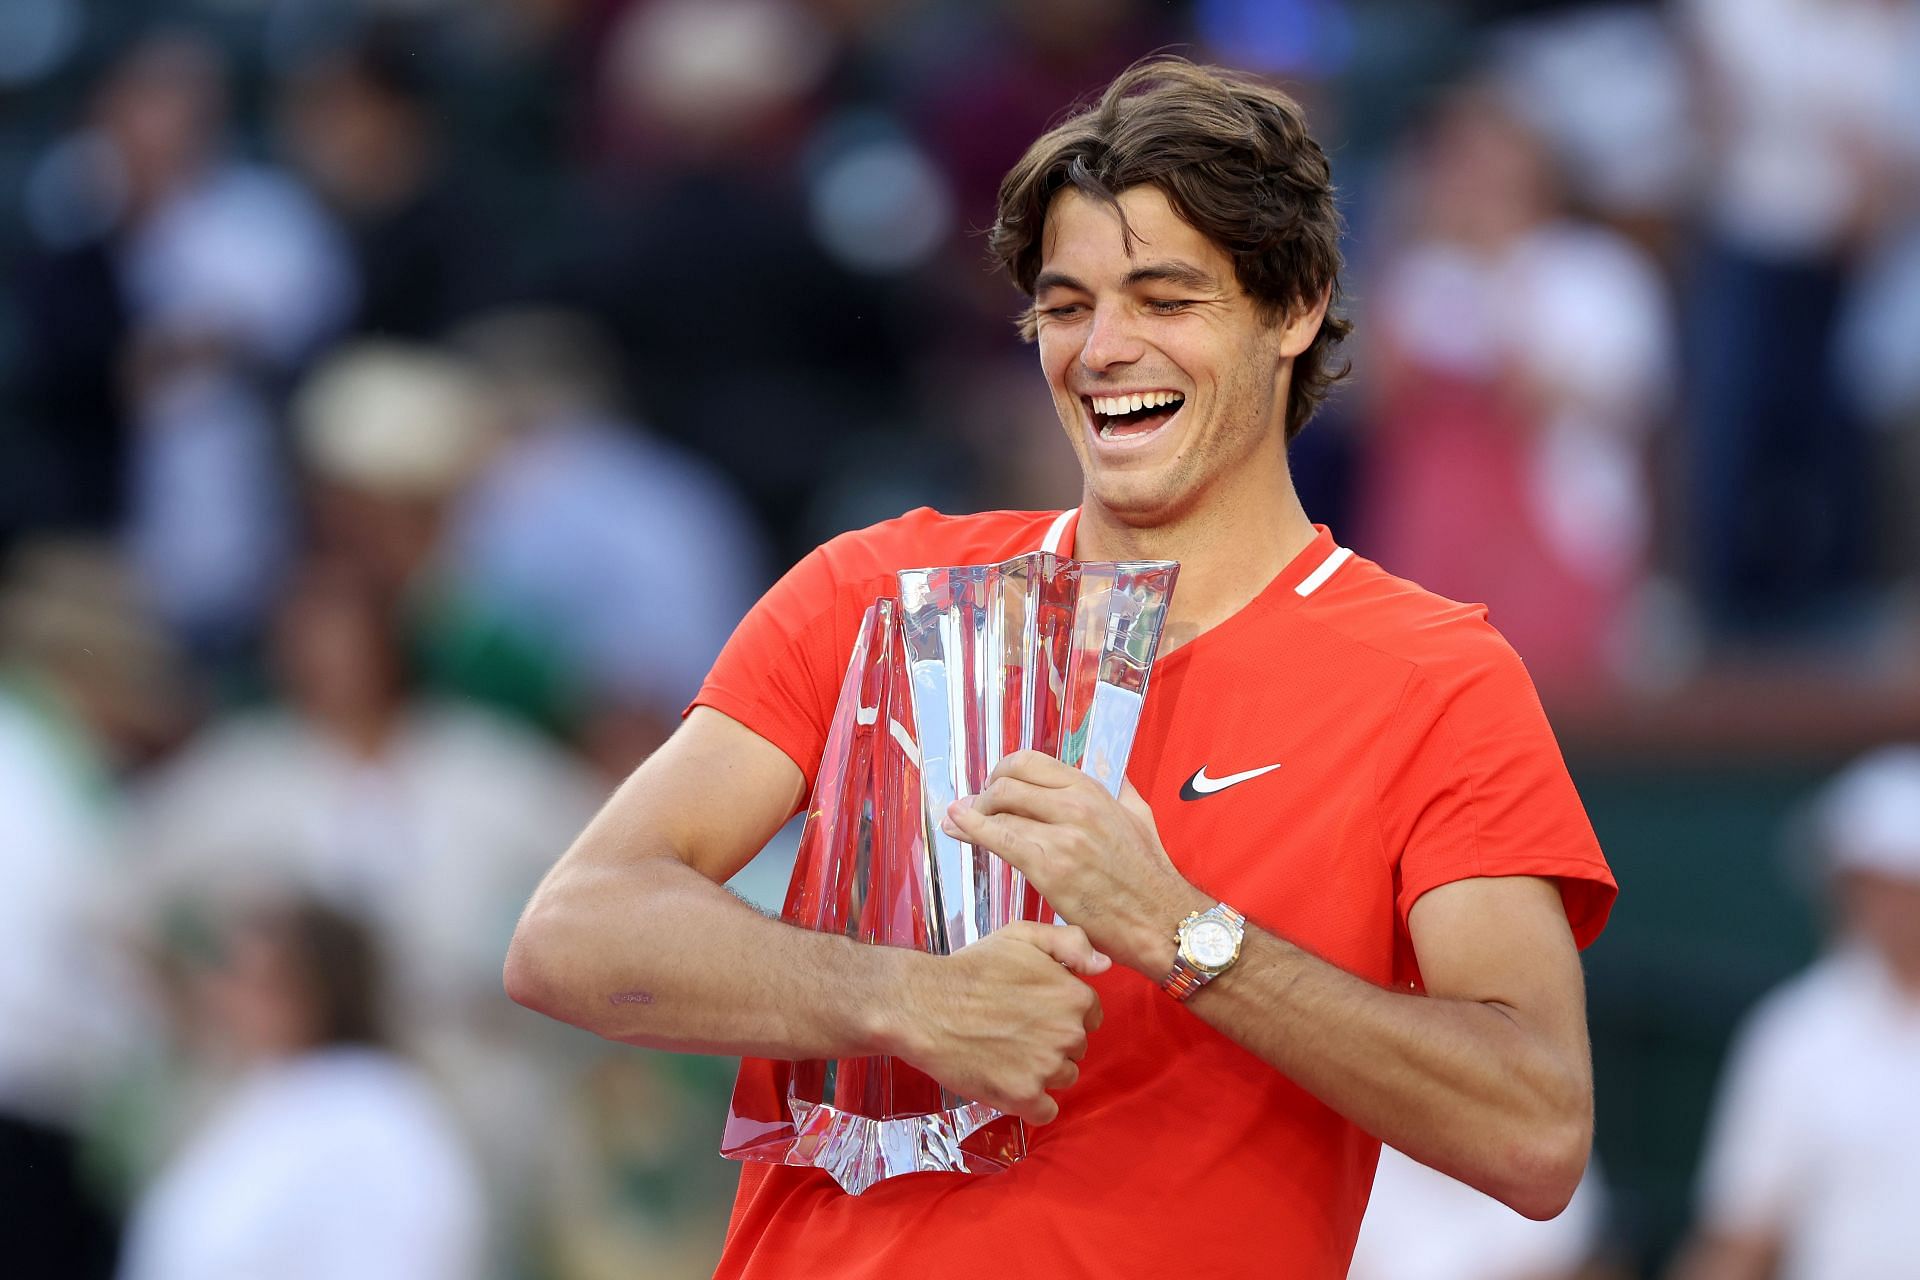 Taylor Fritz won the biggest title of his career on Sunday